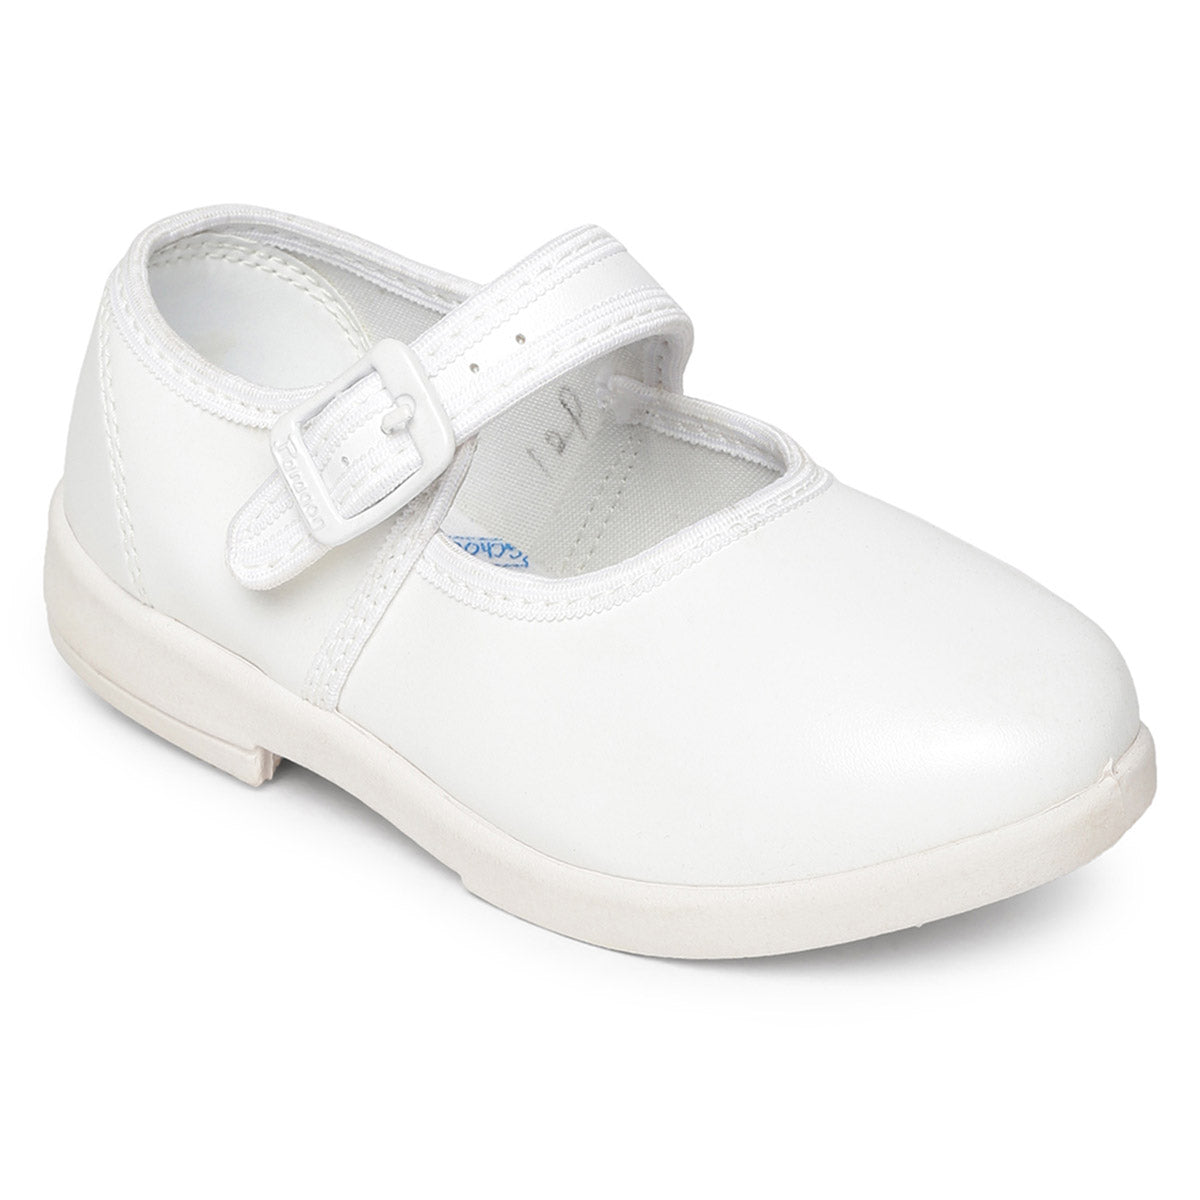 Paragon  PV0755C Kids Formal School Shoes | Comfortable Cushioned Soles | School Shoes for Boys &amp; Girls